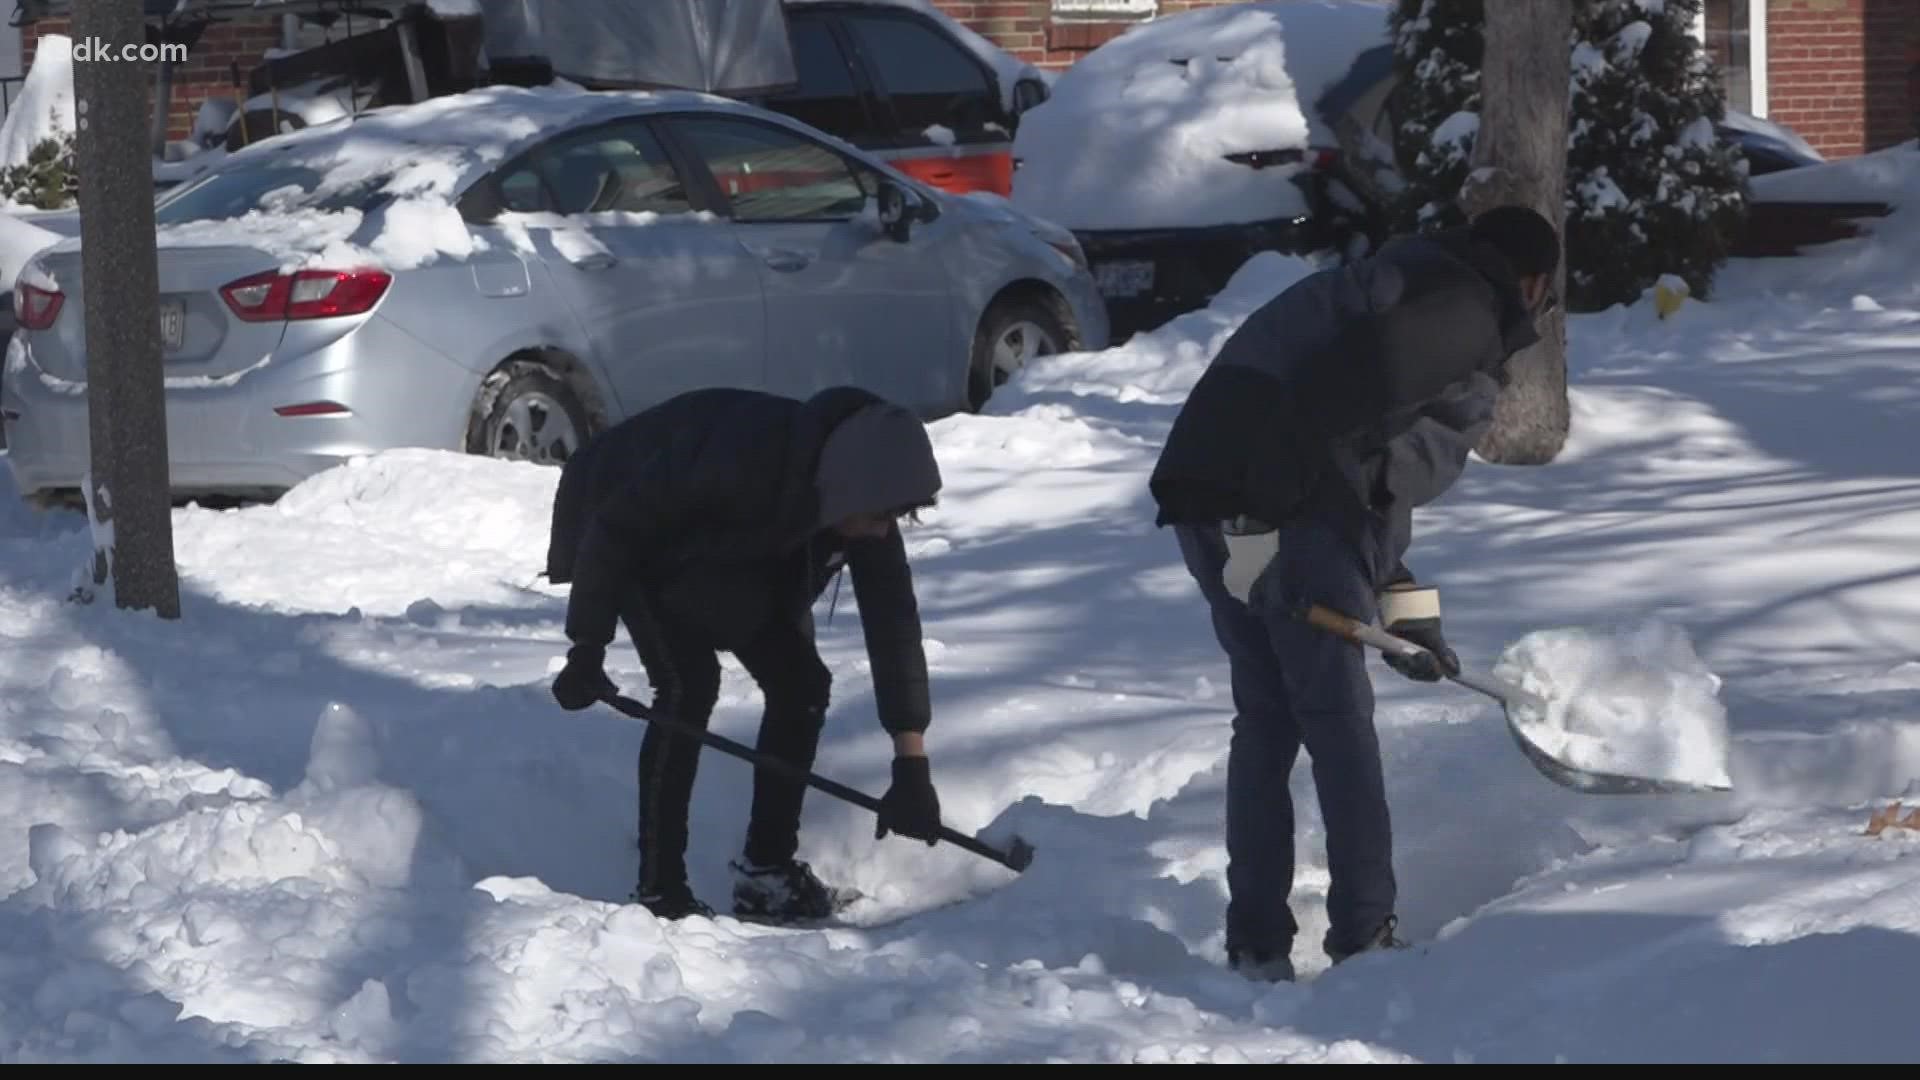 The Urban League has a program called Federation of Block Units. Members help shovel snow and clear driveways for senior citizens and veterans.